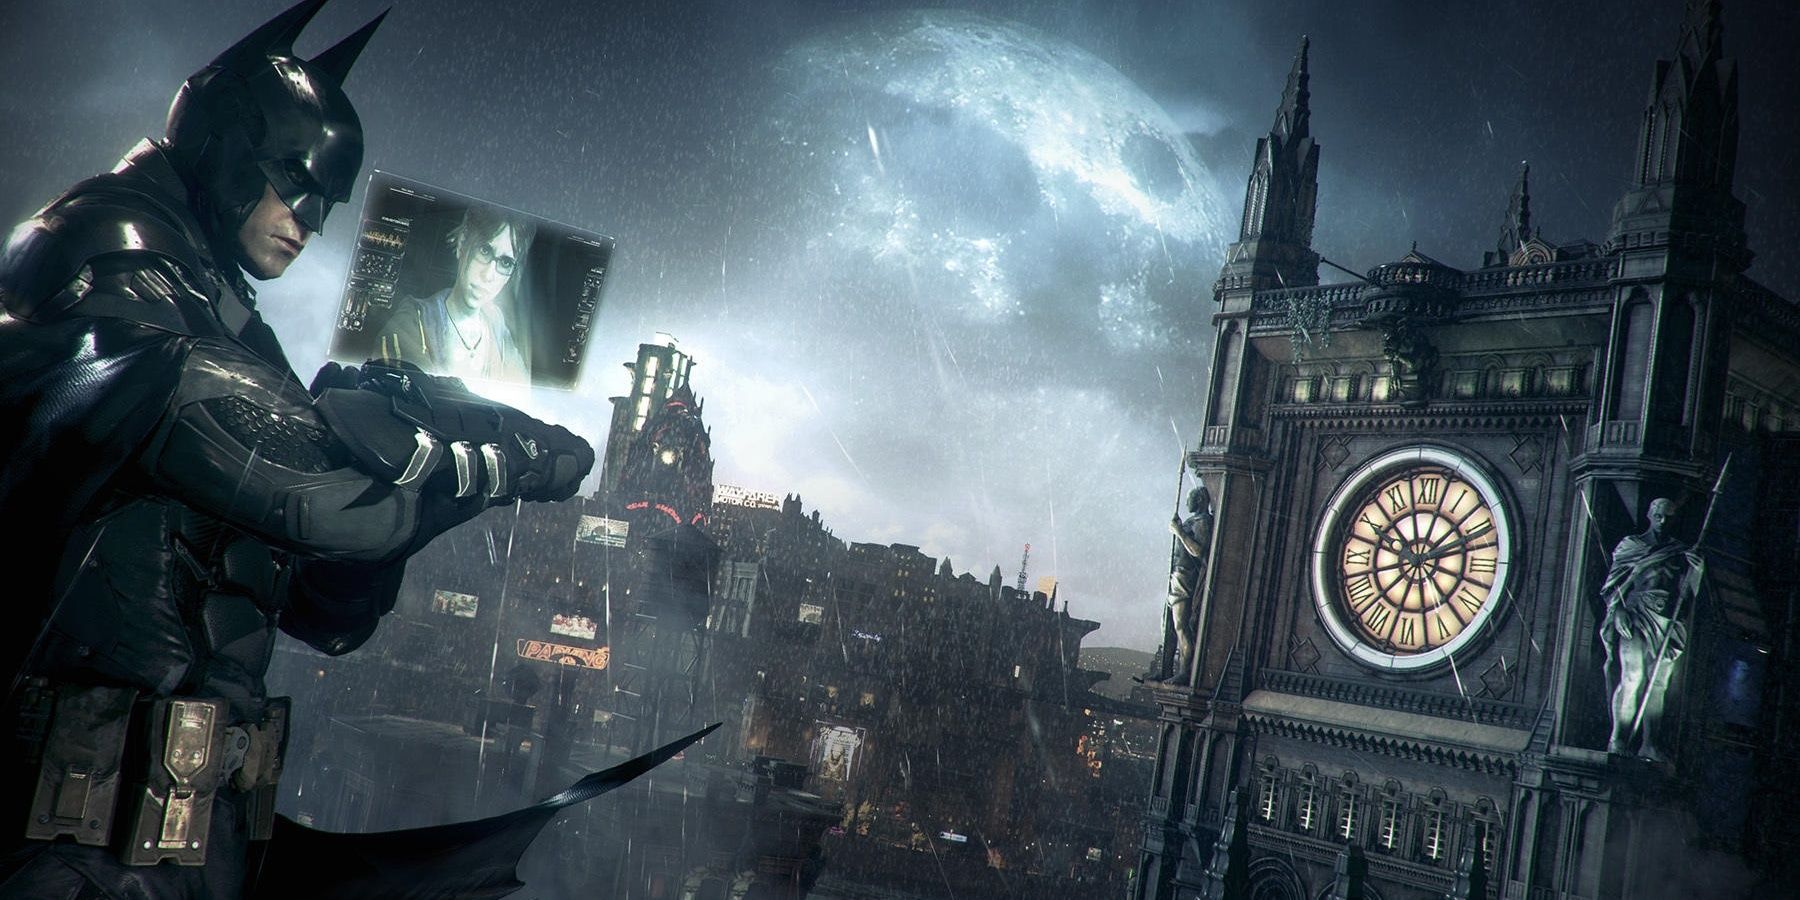 Arkham Knight's graphics were greatly improved